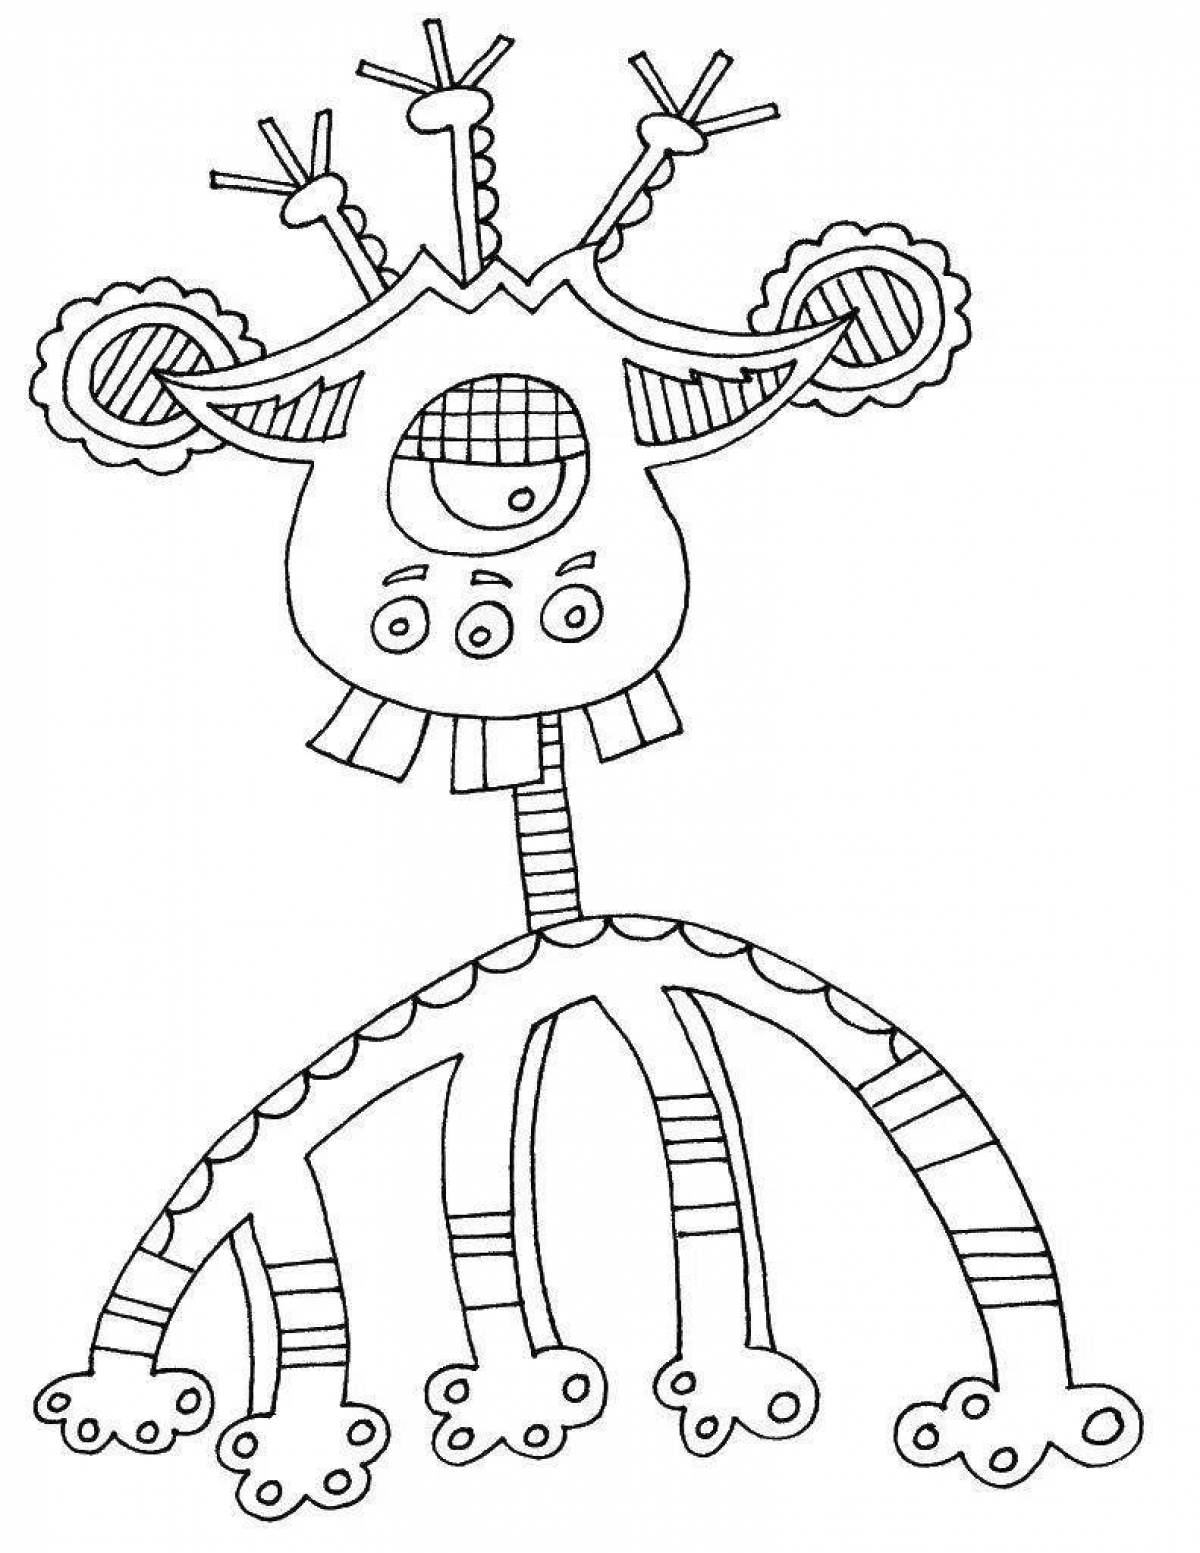 Creative alien coloring pages for kids